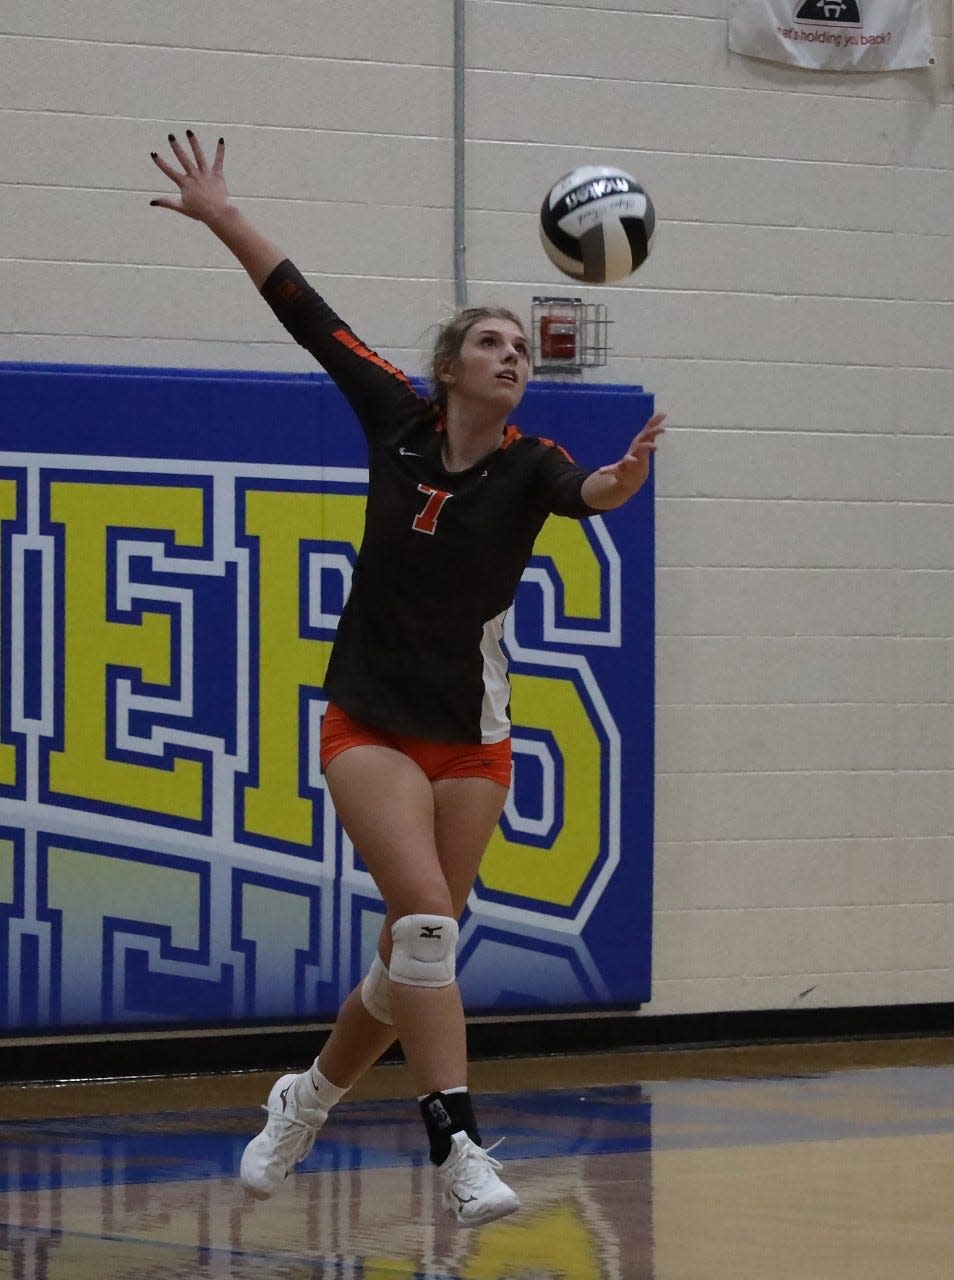 Meadowbrook senior All-Ohio standout Camden Black (7) prepares to serve during Saturday's Division III district championship match with Fort Frye at Maysville High School. Black and the Lady Colts picked up the district title with a three set sweep, to advance to their 3rd straight regional tournament appearance.